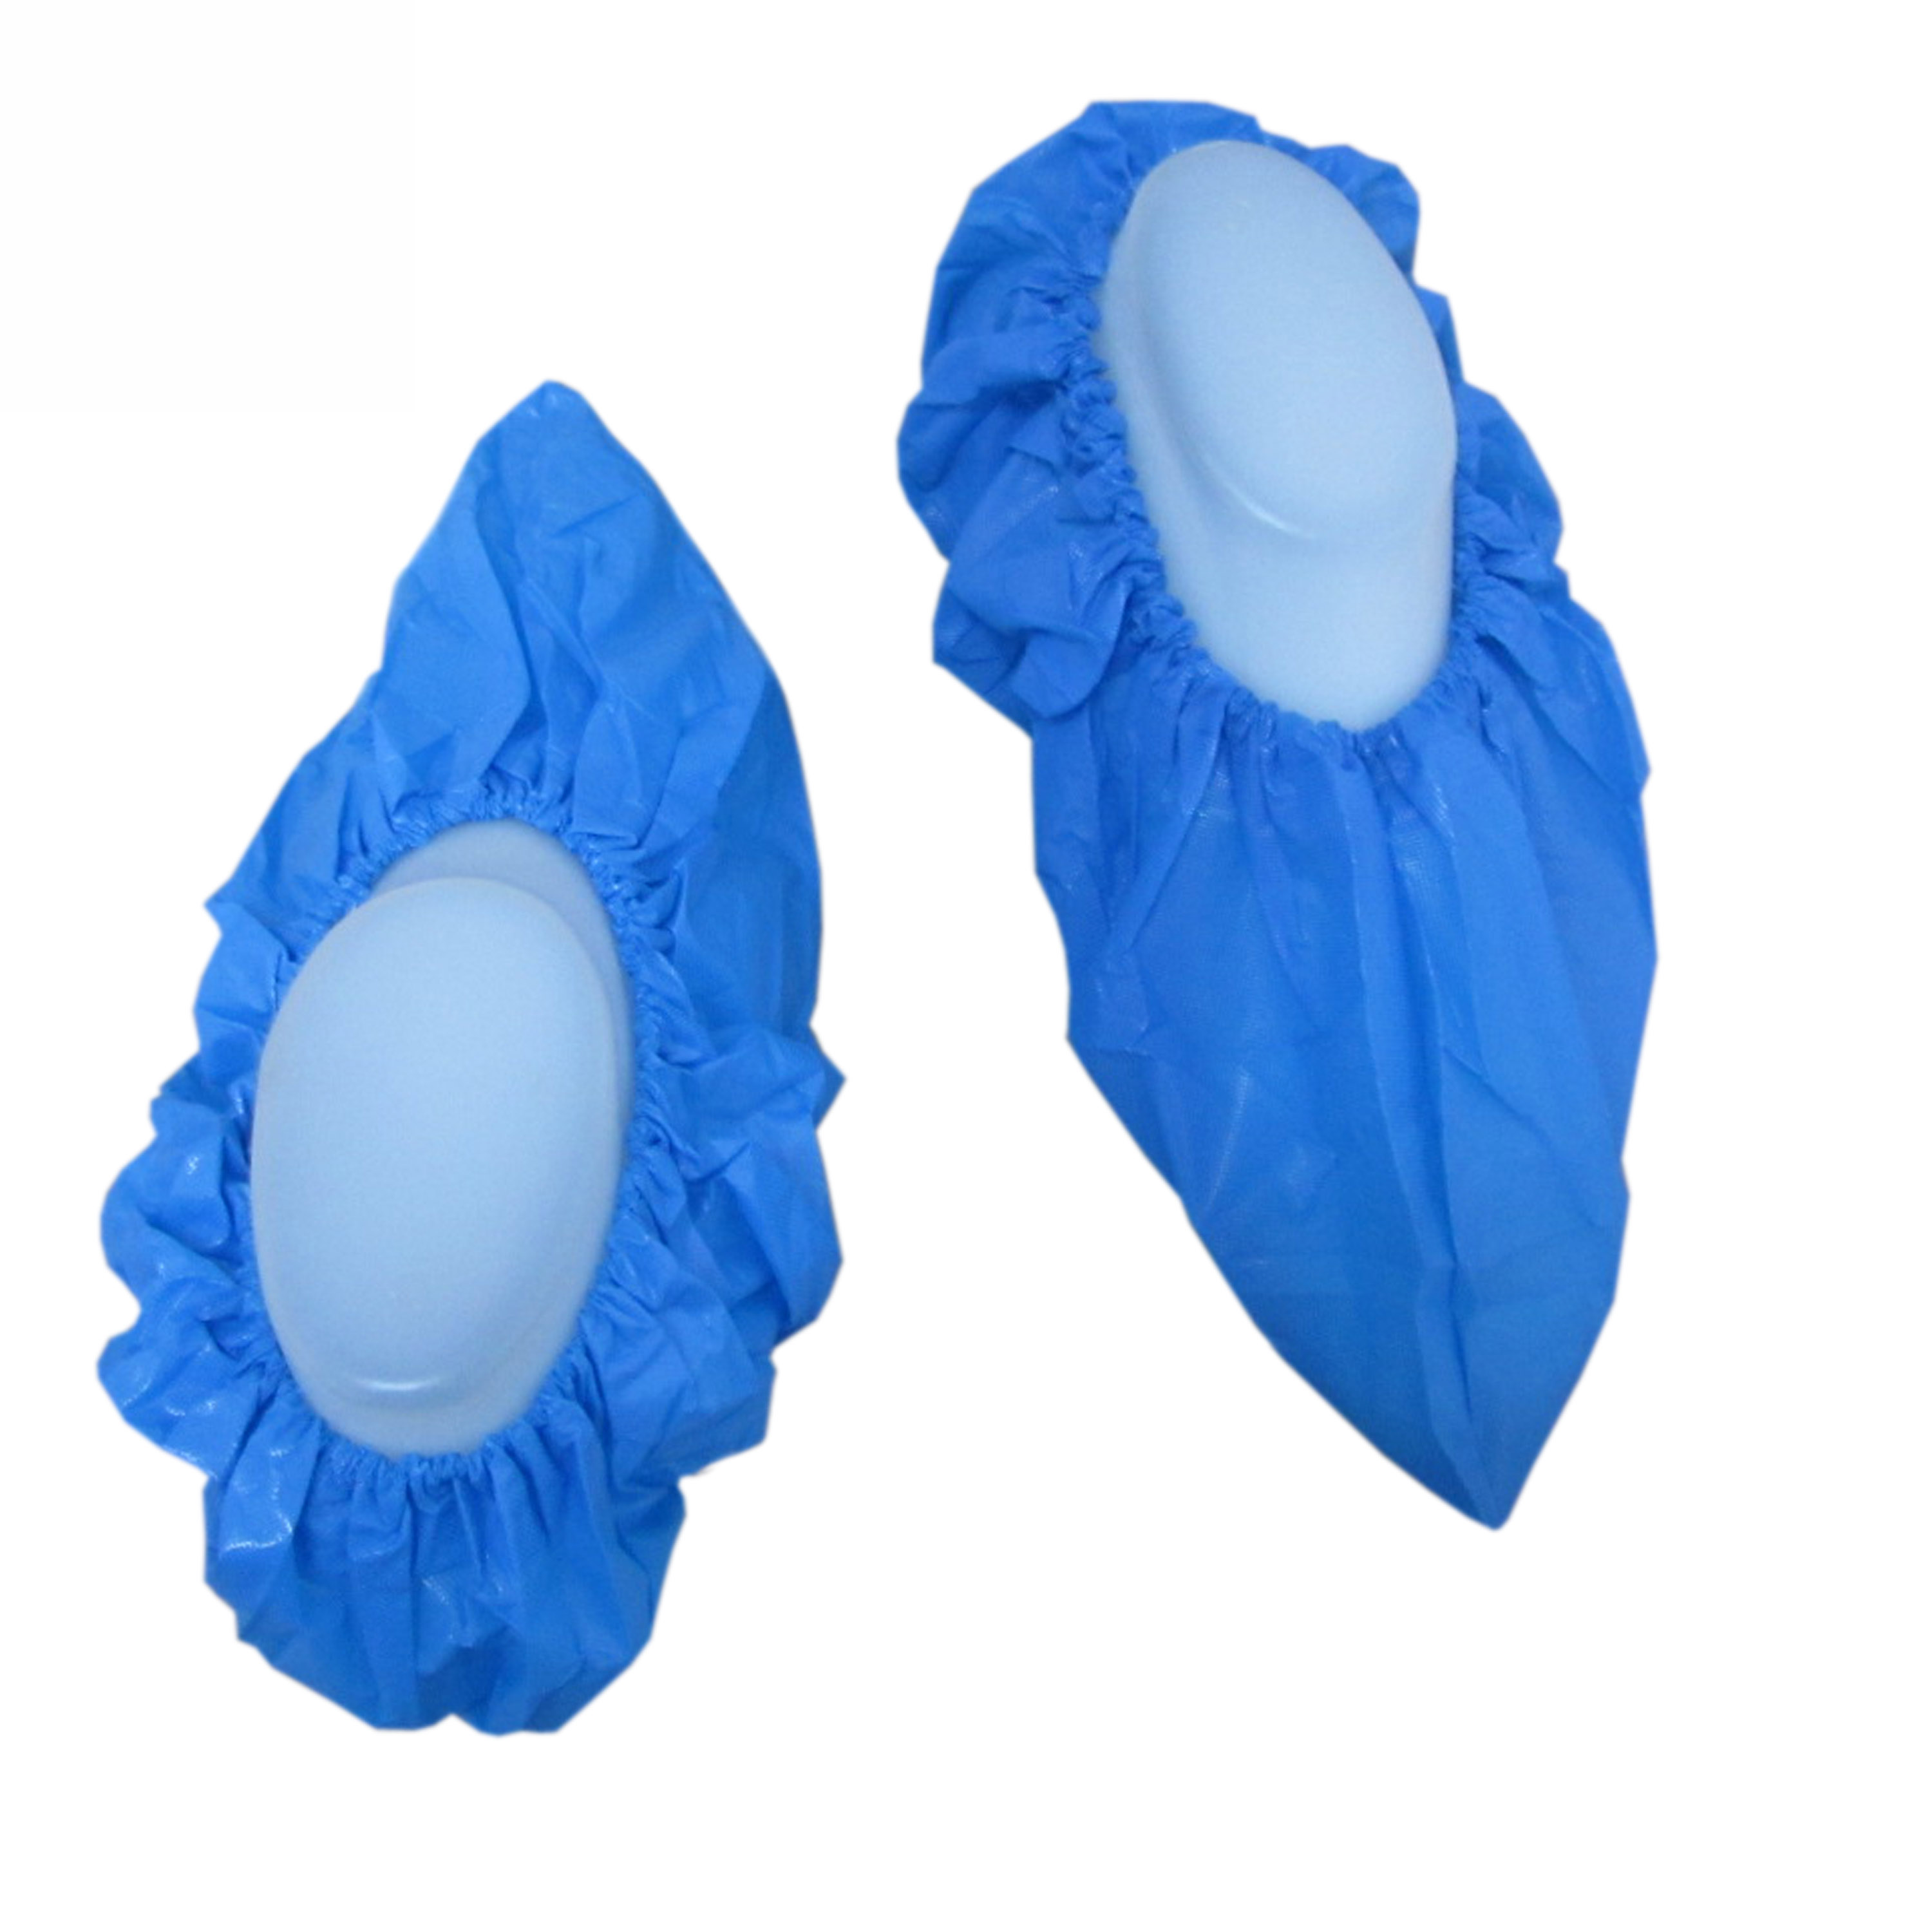 Waterproof Disposable PE CPE Plastic Shoe Covers /Medical hospital safety protection